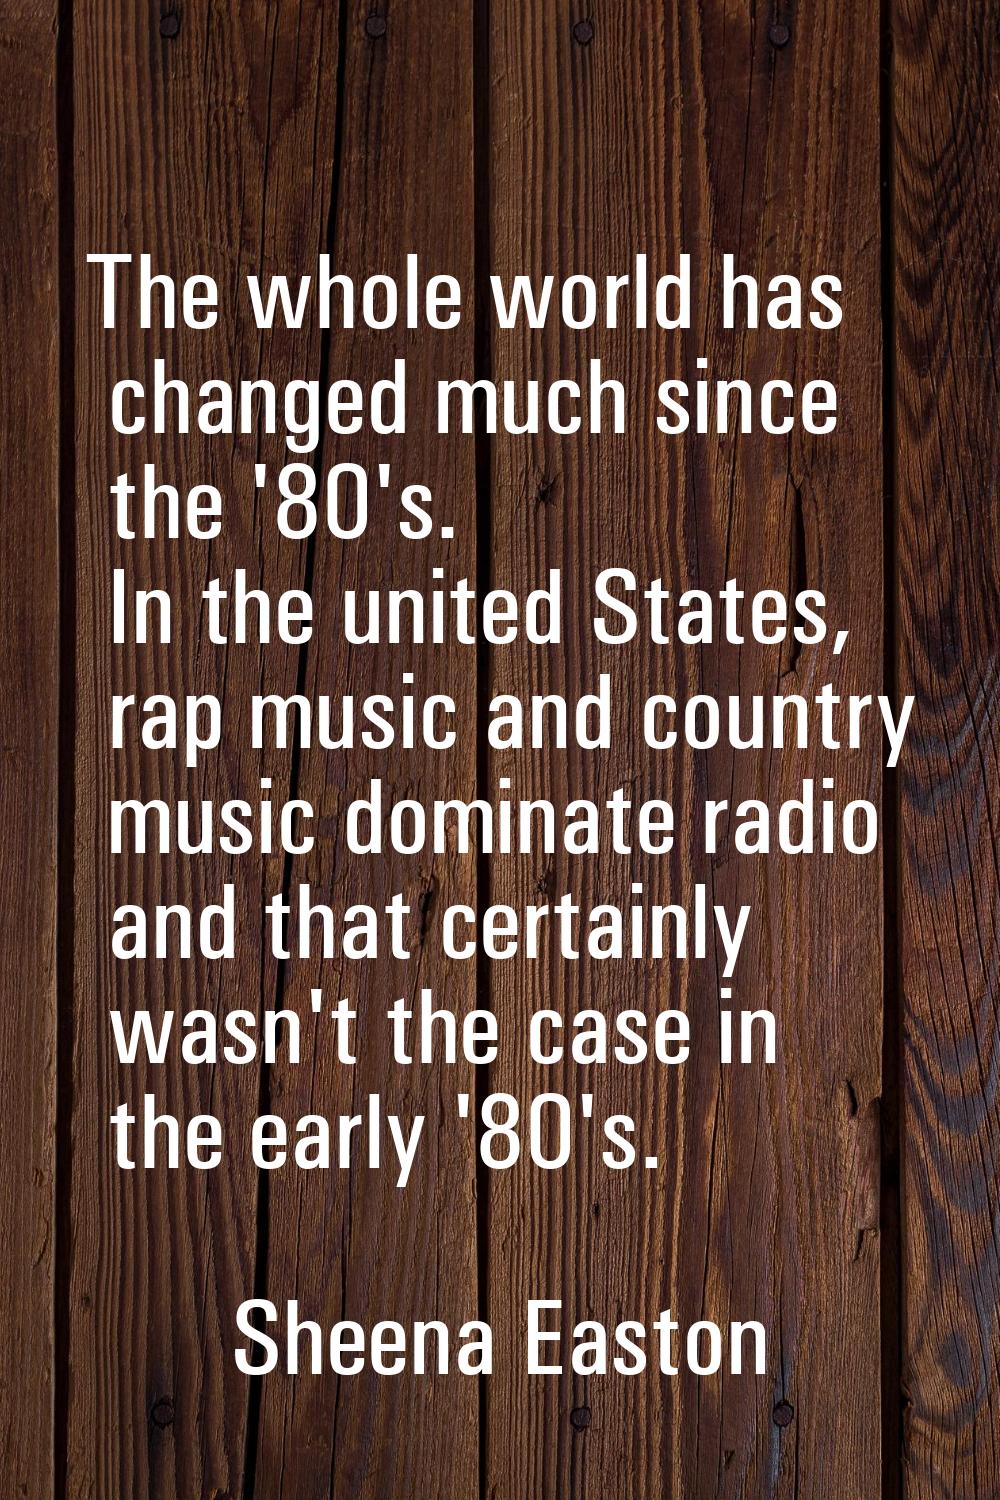 The whole world has changed much since the '80's. In the united States, rap music and country music